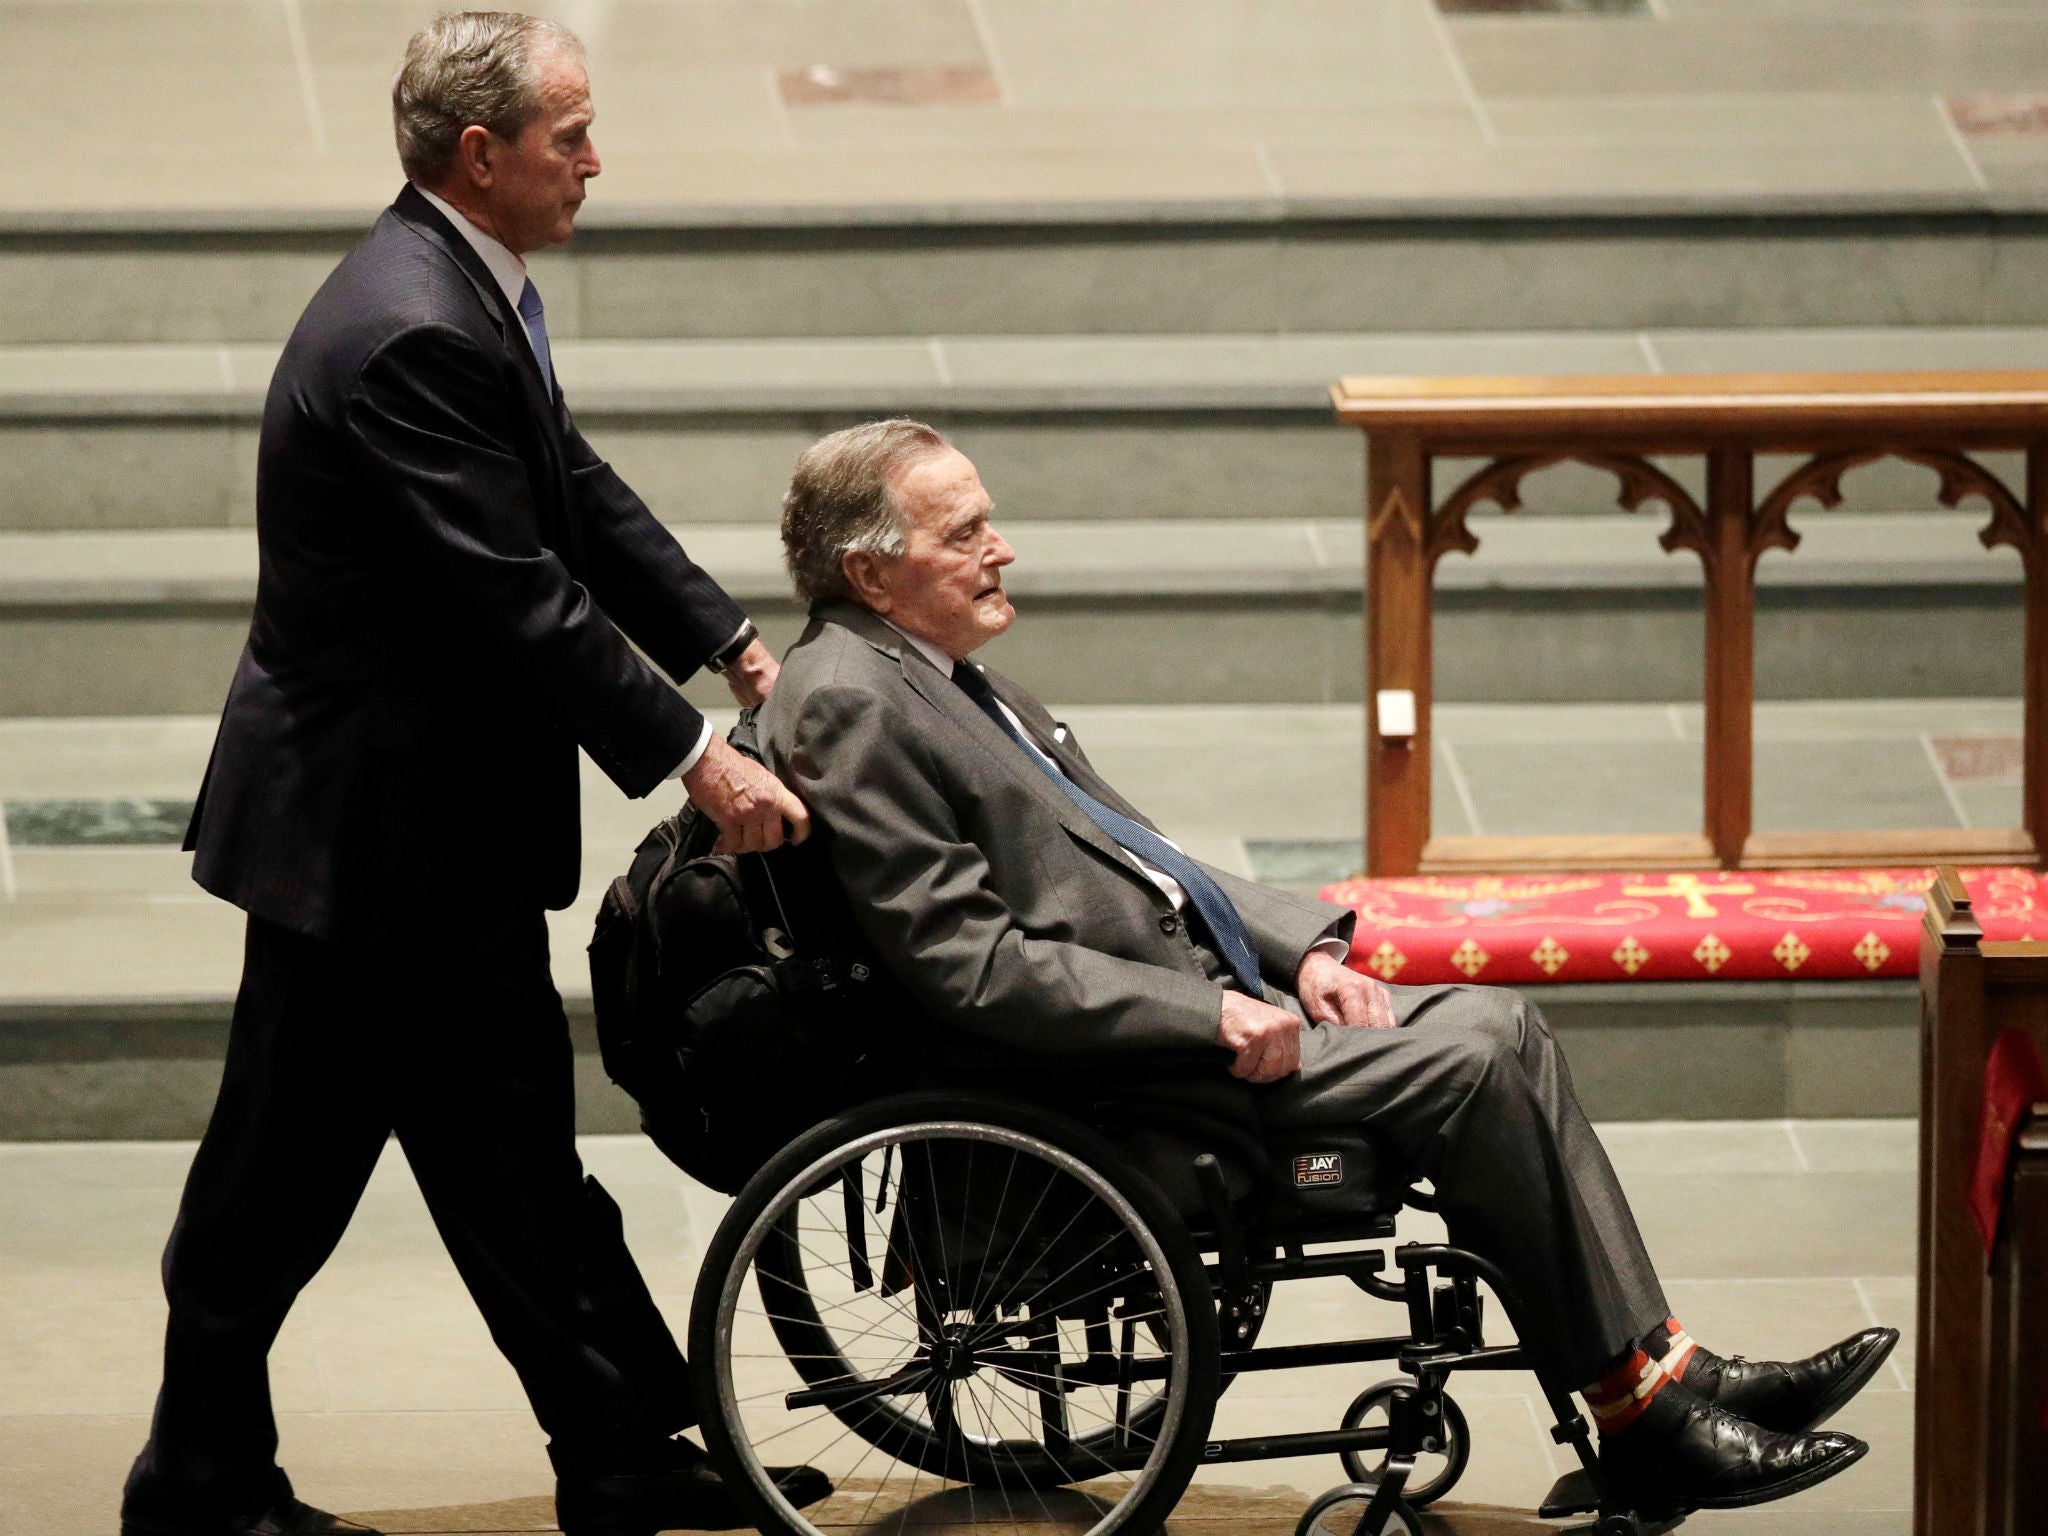 Former president George HW Bush is pushed by his son, former president George W Bush, during funeral services for former first lady Barbara Bush in Houston, Texas